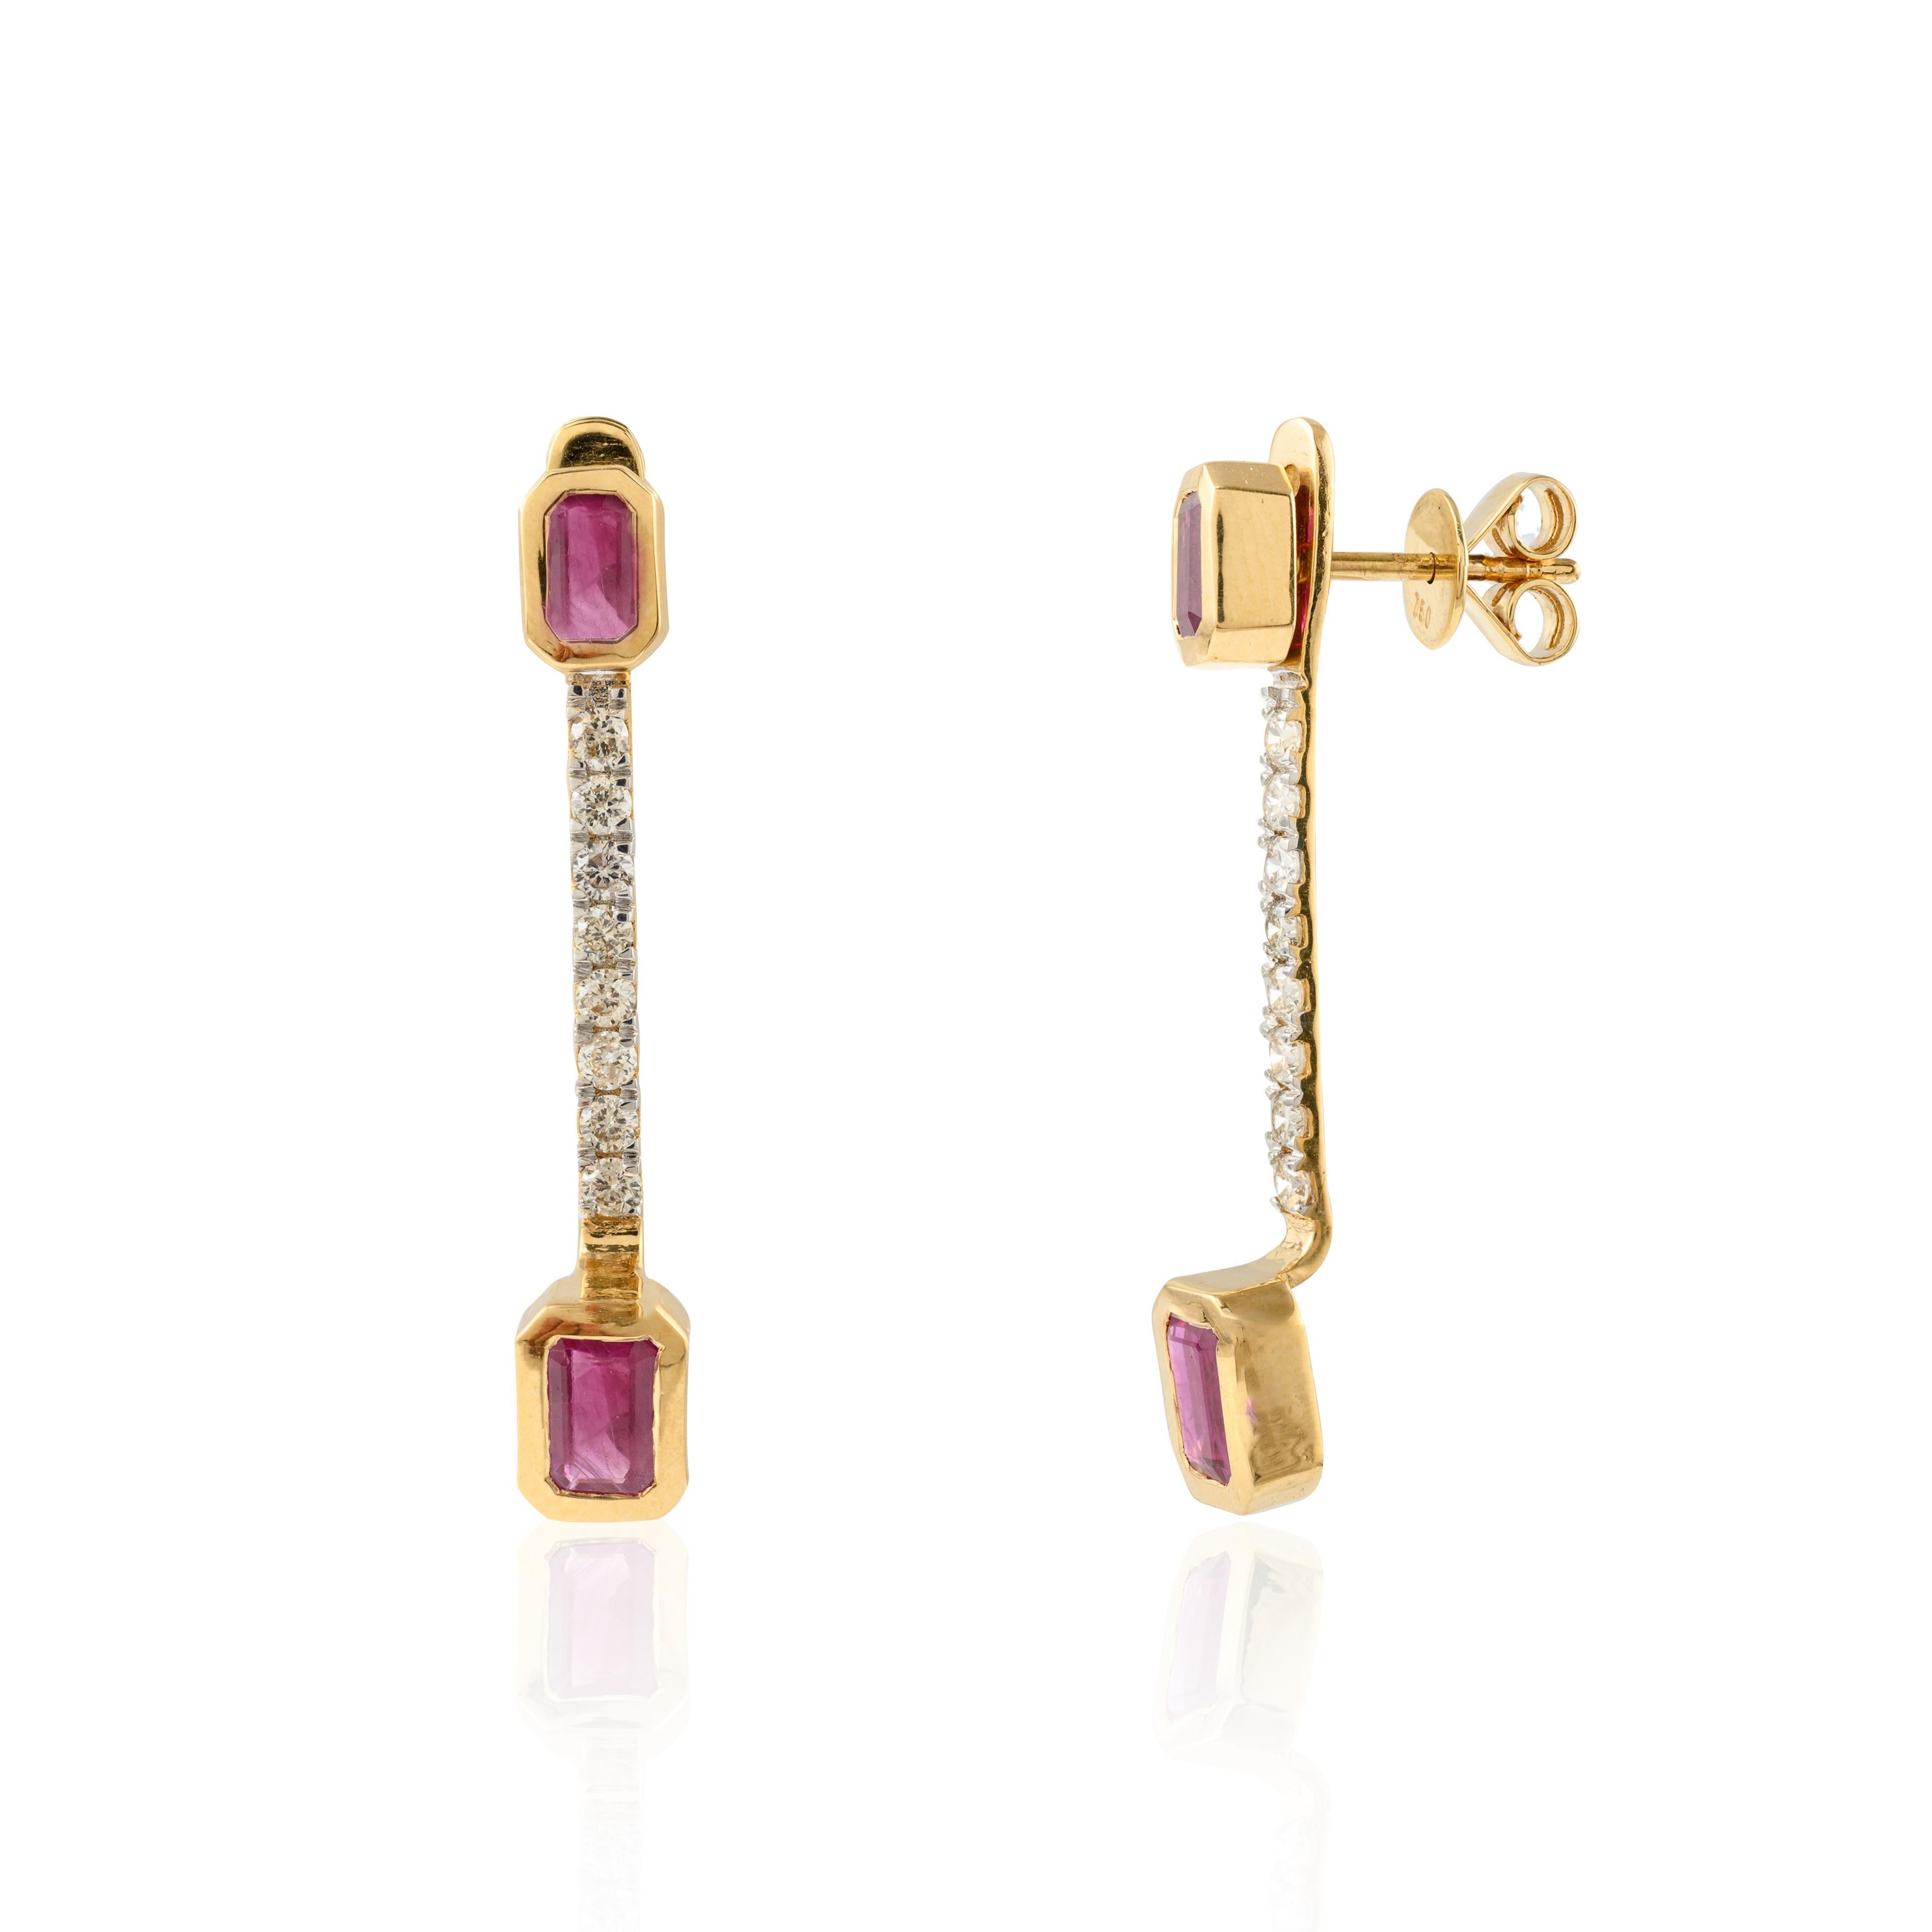 Natural Ruby Diamond Drop Earrings in 18K Gold to make a statement with your look. These earrings create a sparkling, luxurious look featuring octagon cut ruby.
Ruby improves mental strength. 
Designed with octagon cut ruby set in bezel set as stud,